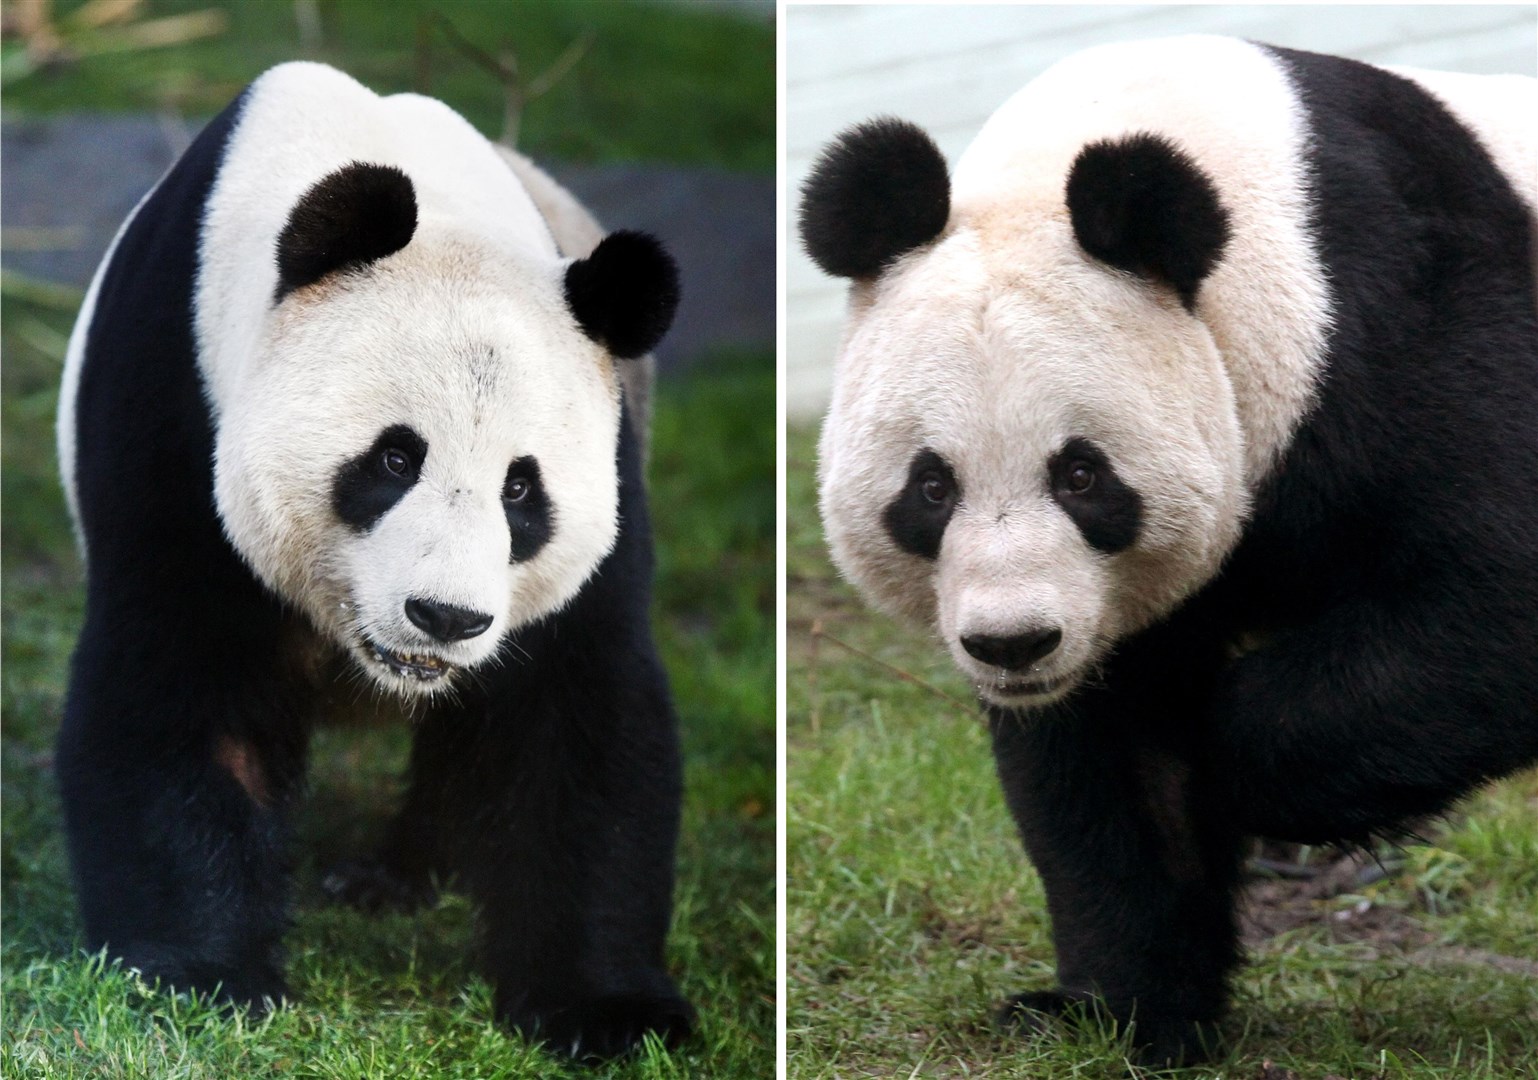 Yang Guang (left) and Tian Tian now live in separate enclosures (PA)